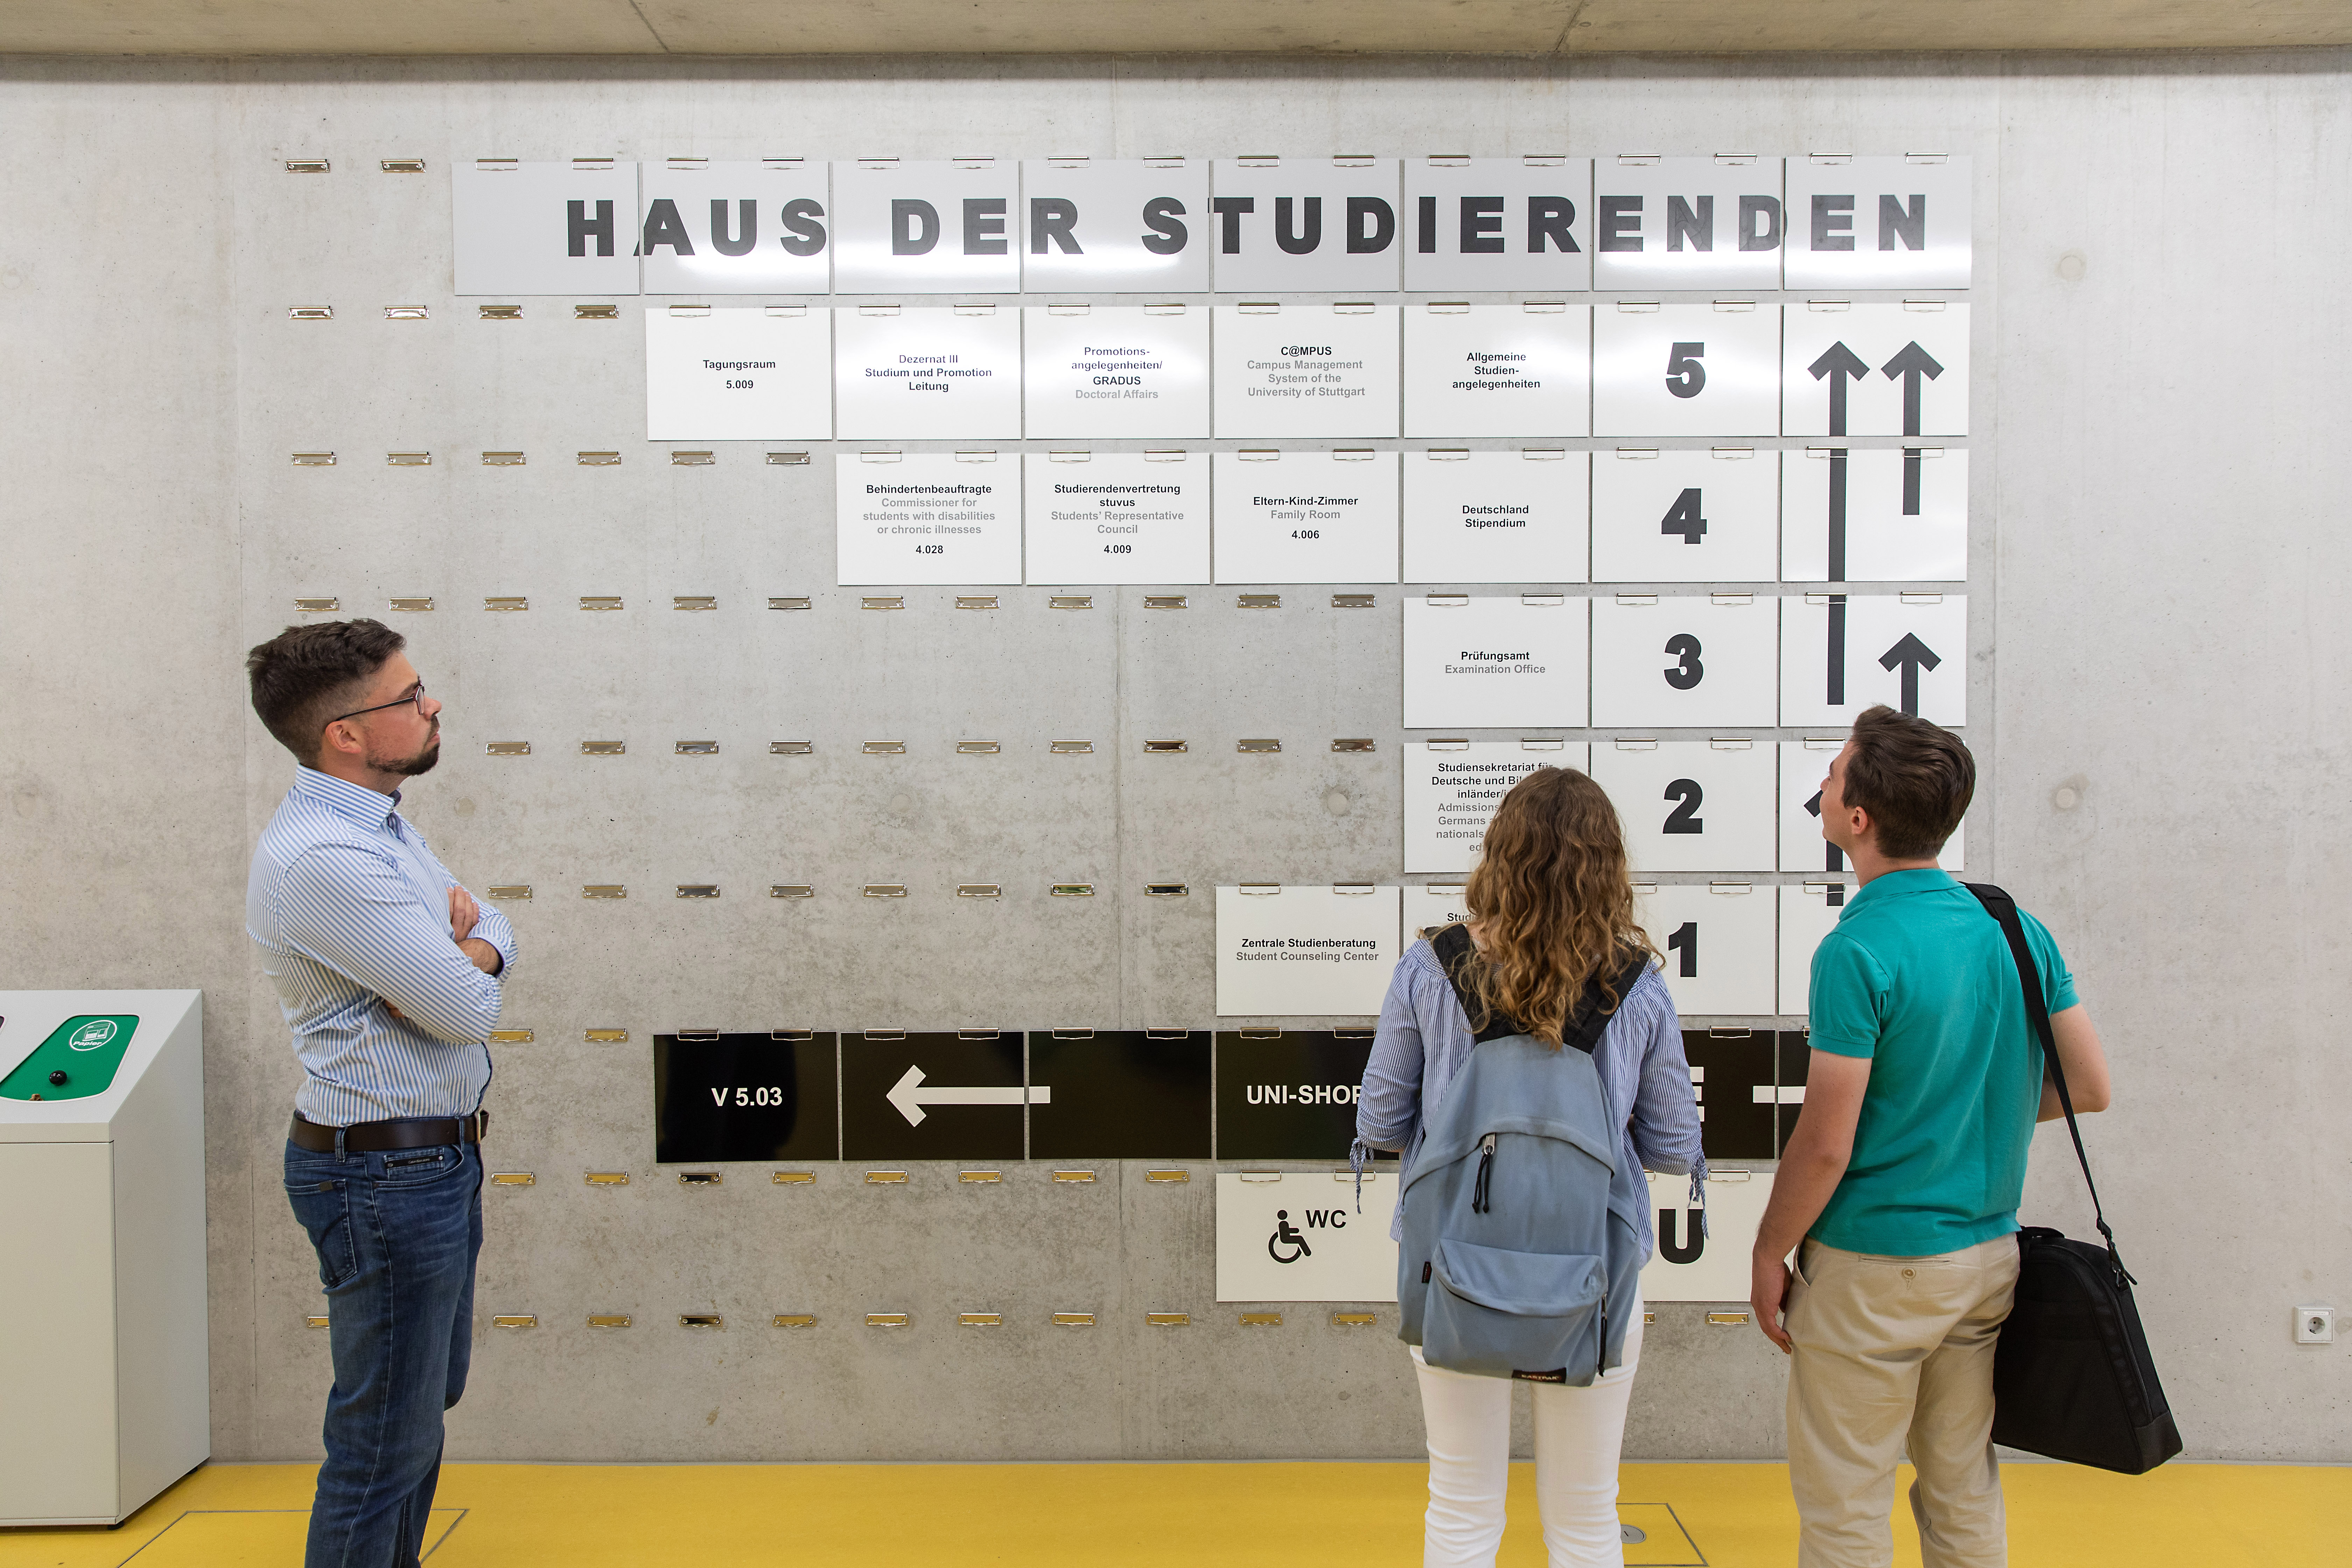 Students looking on the signboard of the house of students of the University of Stuttgart.